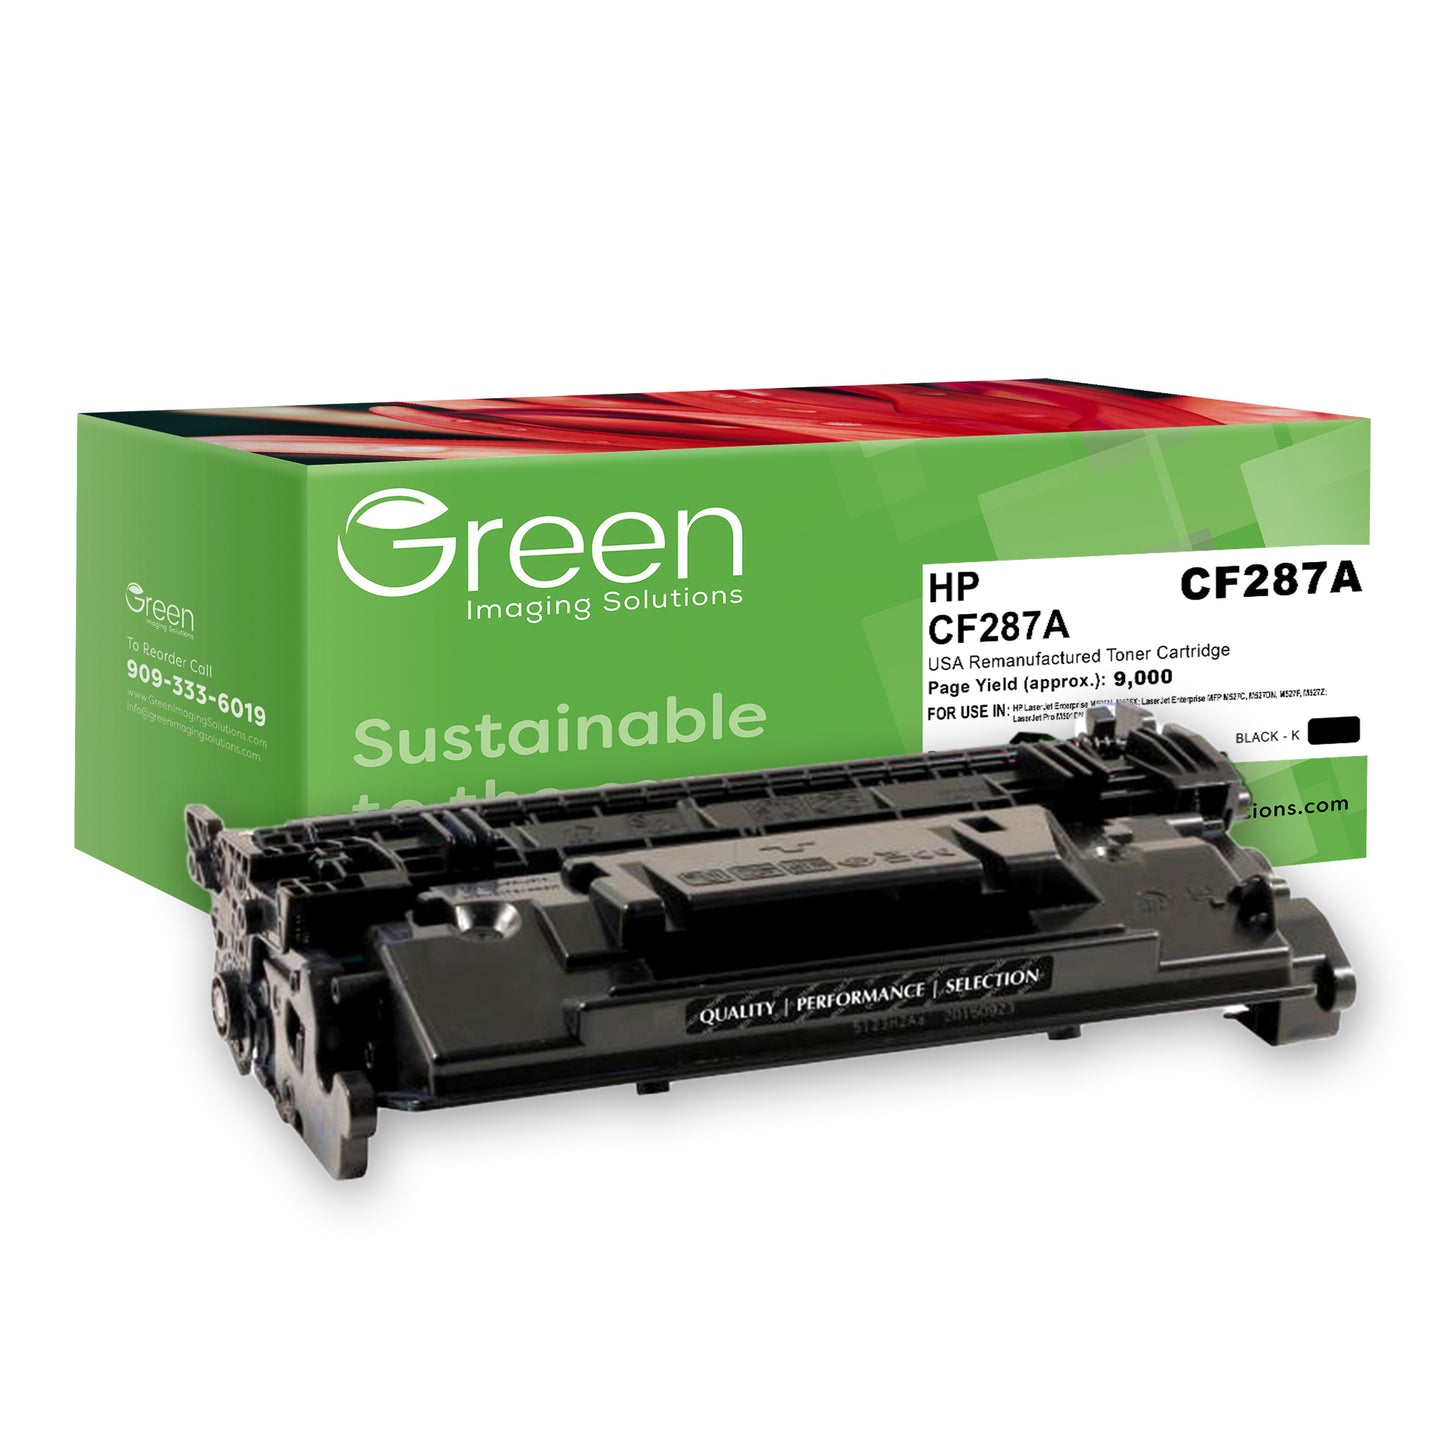 GIS USA Remanufactured Toner Cartridge for HP CF287A (HP 87A)